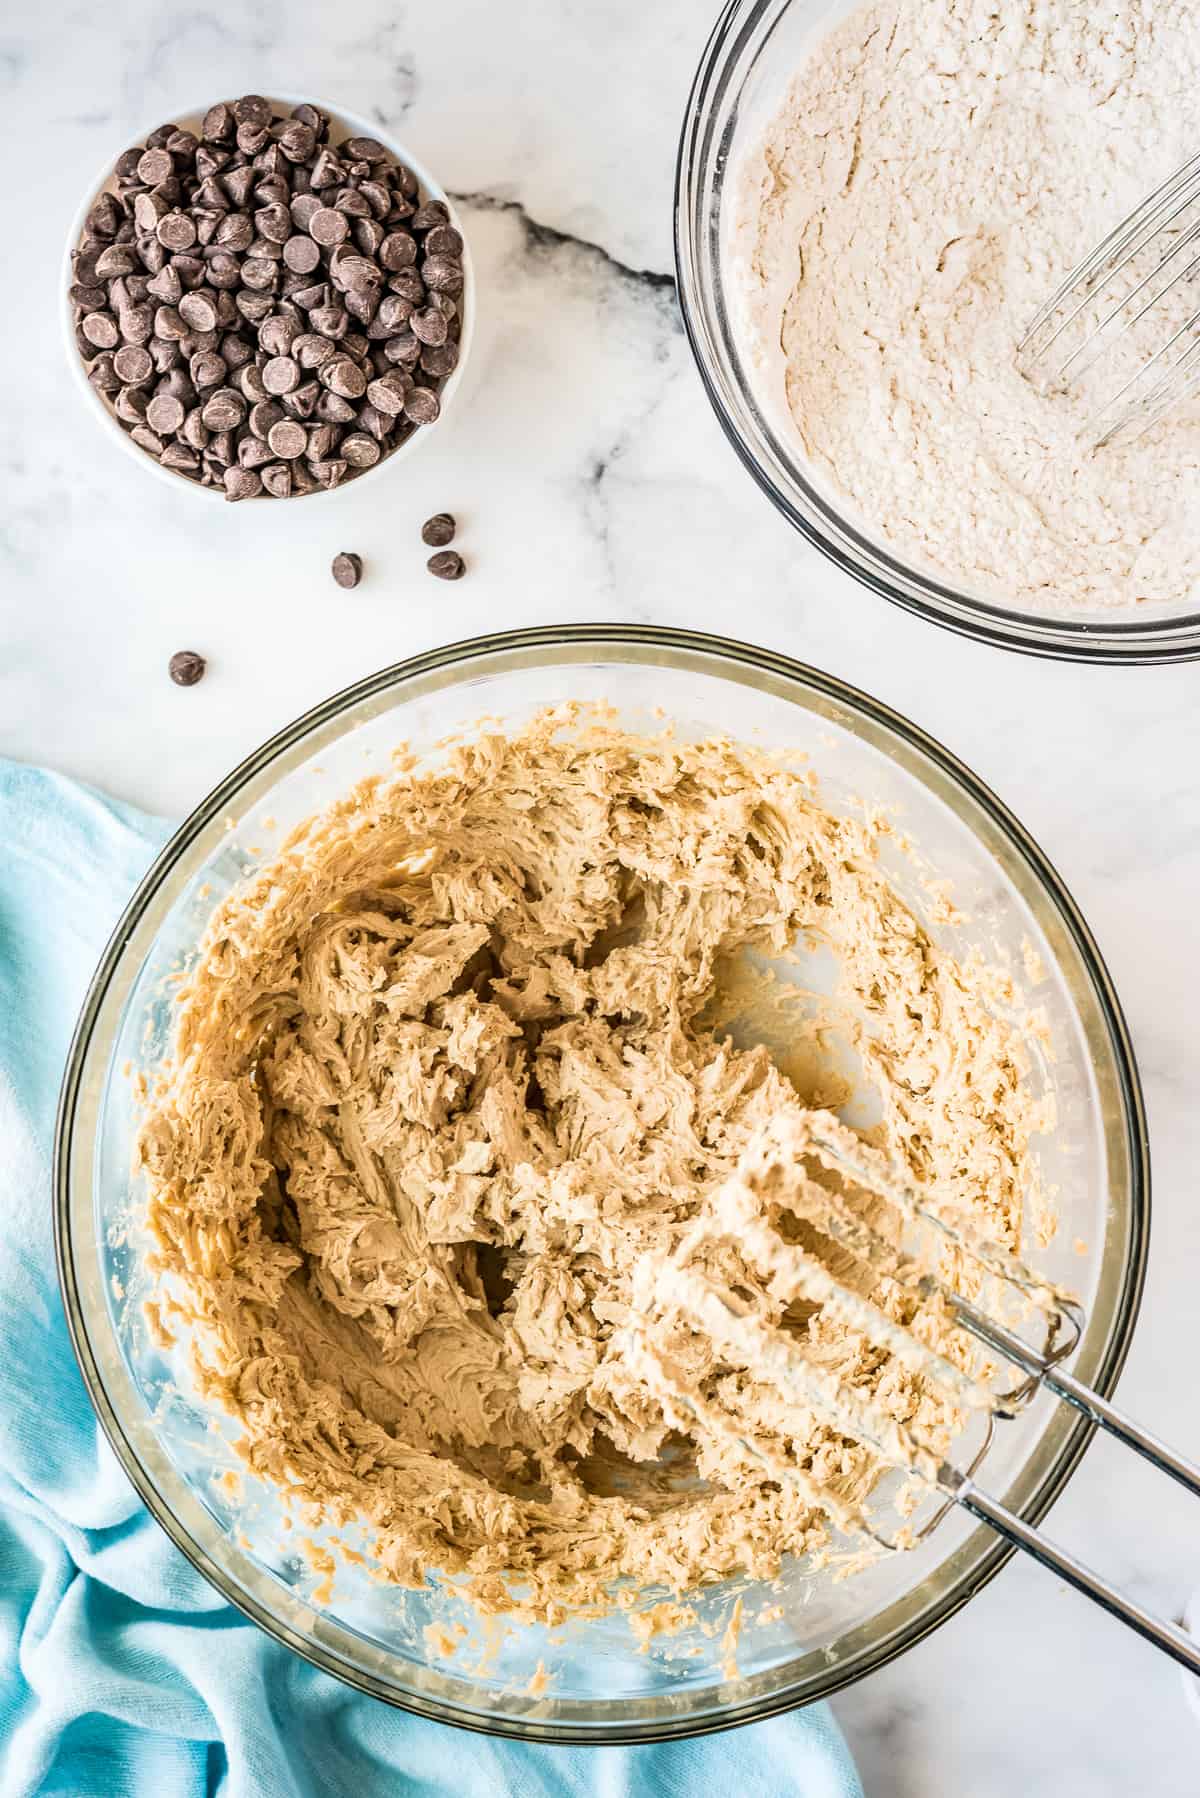 Batter for cookies in bowl